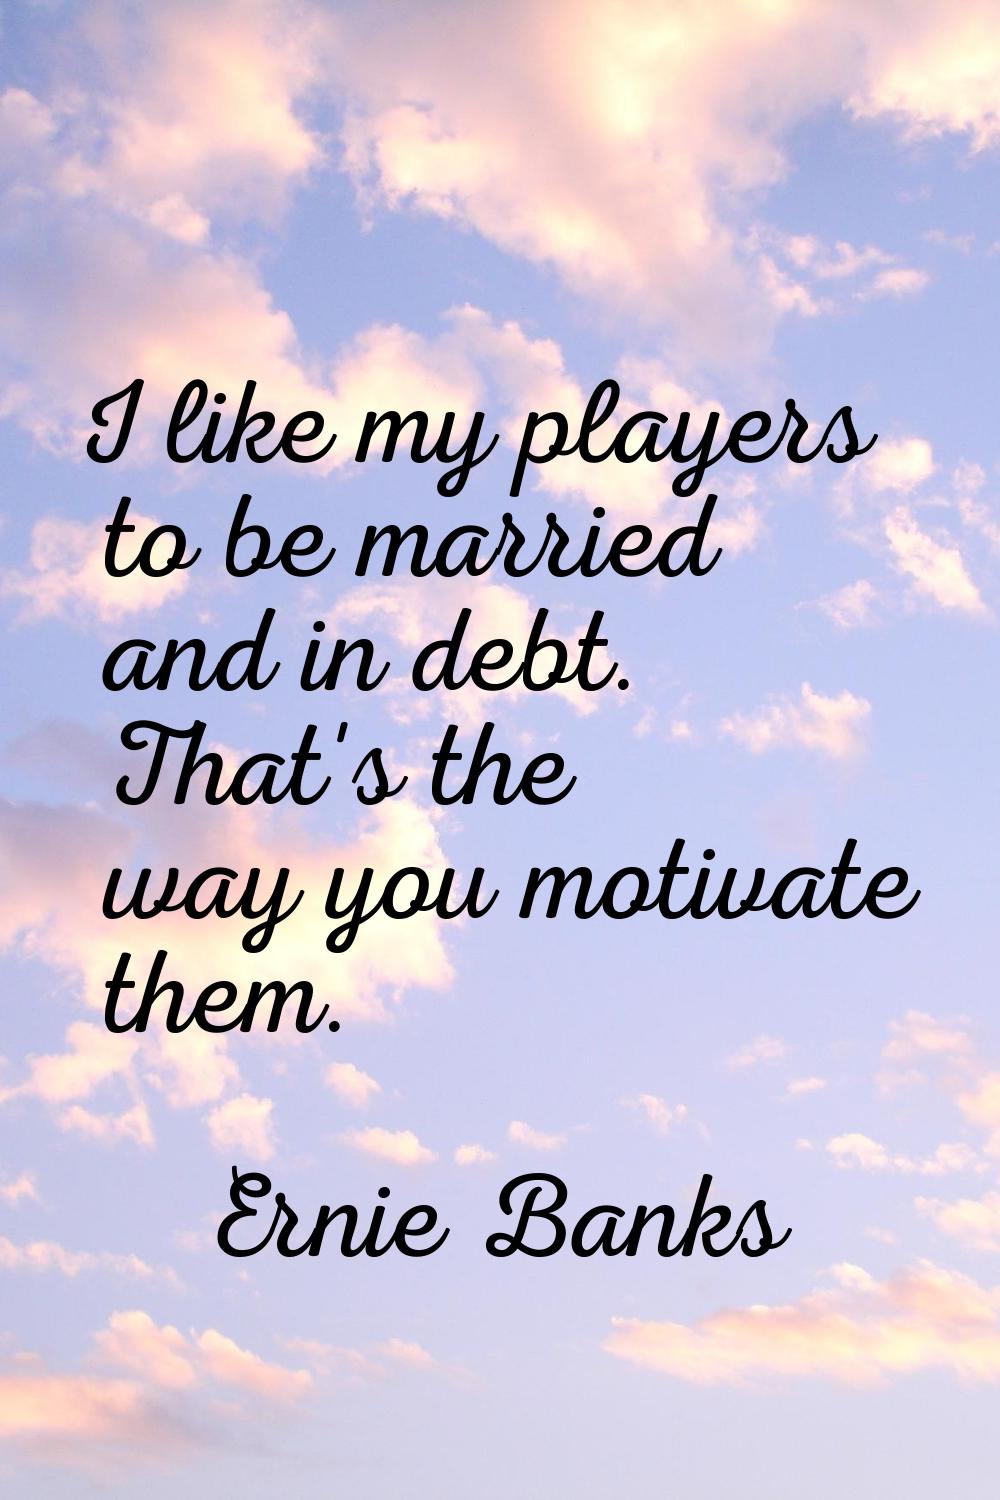 I like my players to be married and in debt. That's the way you motivate them.